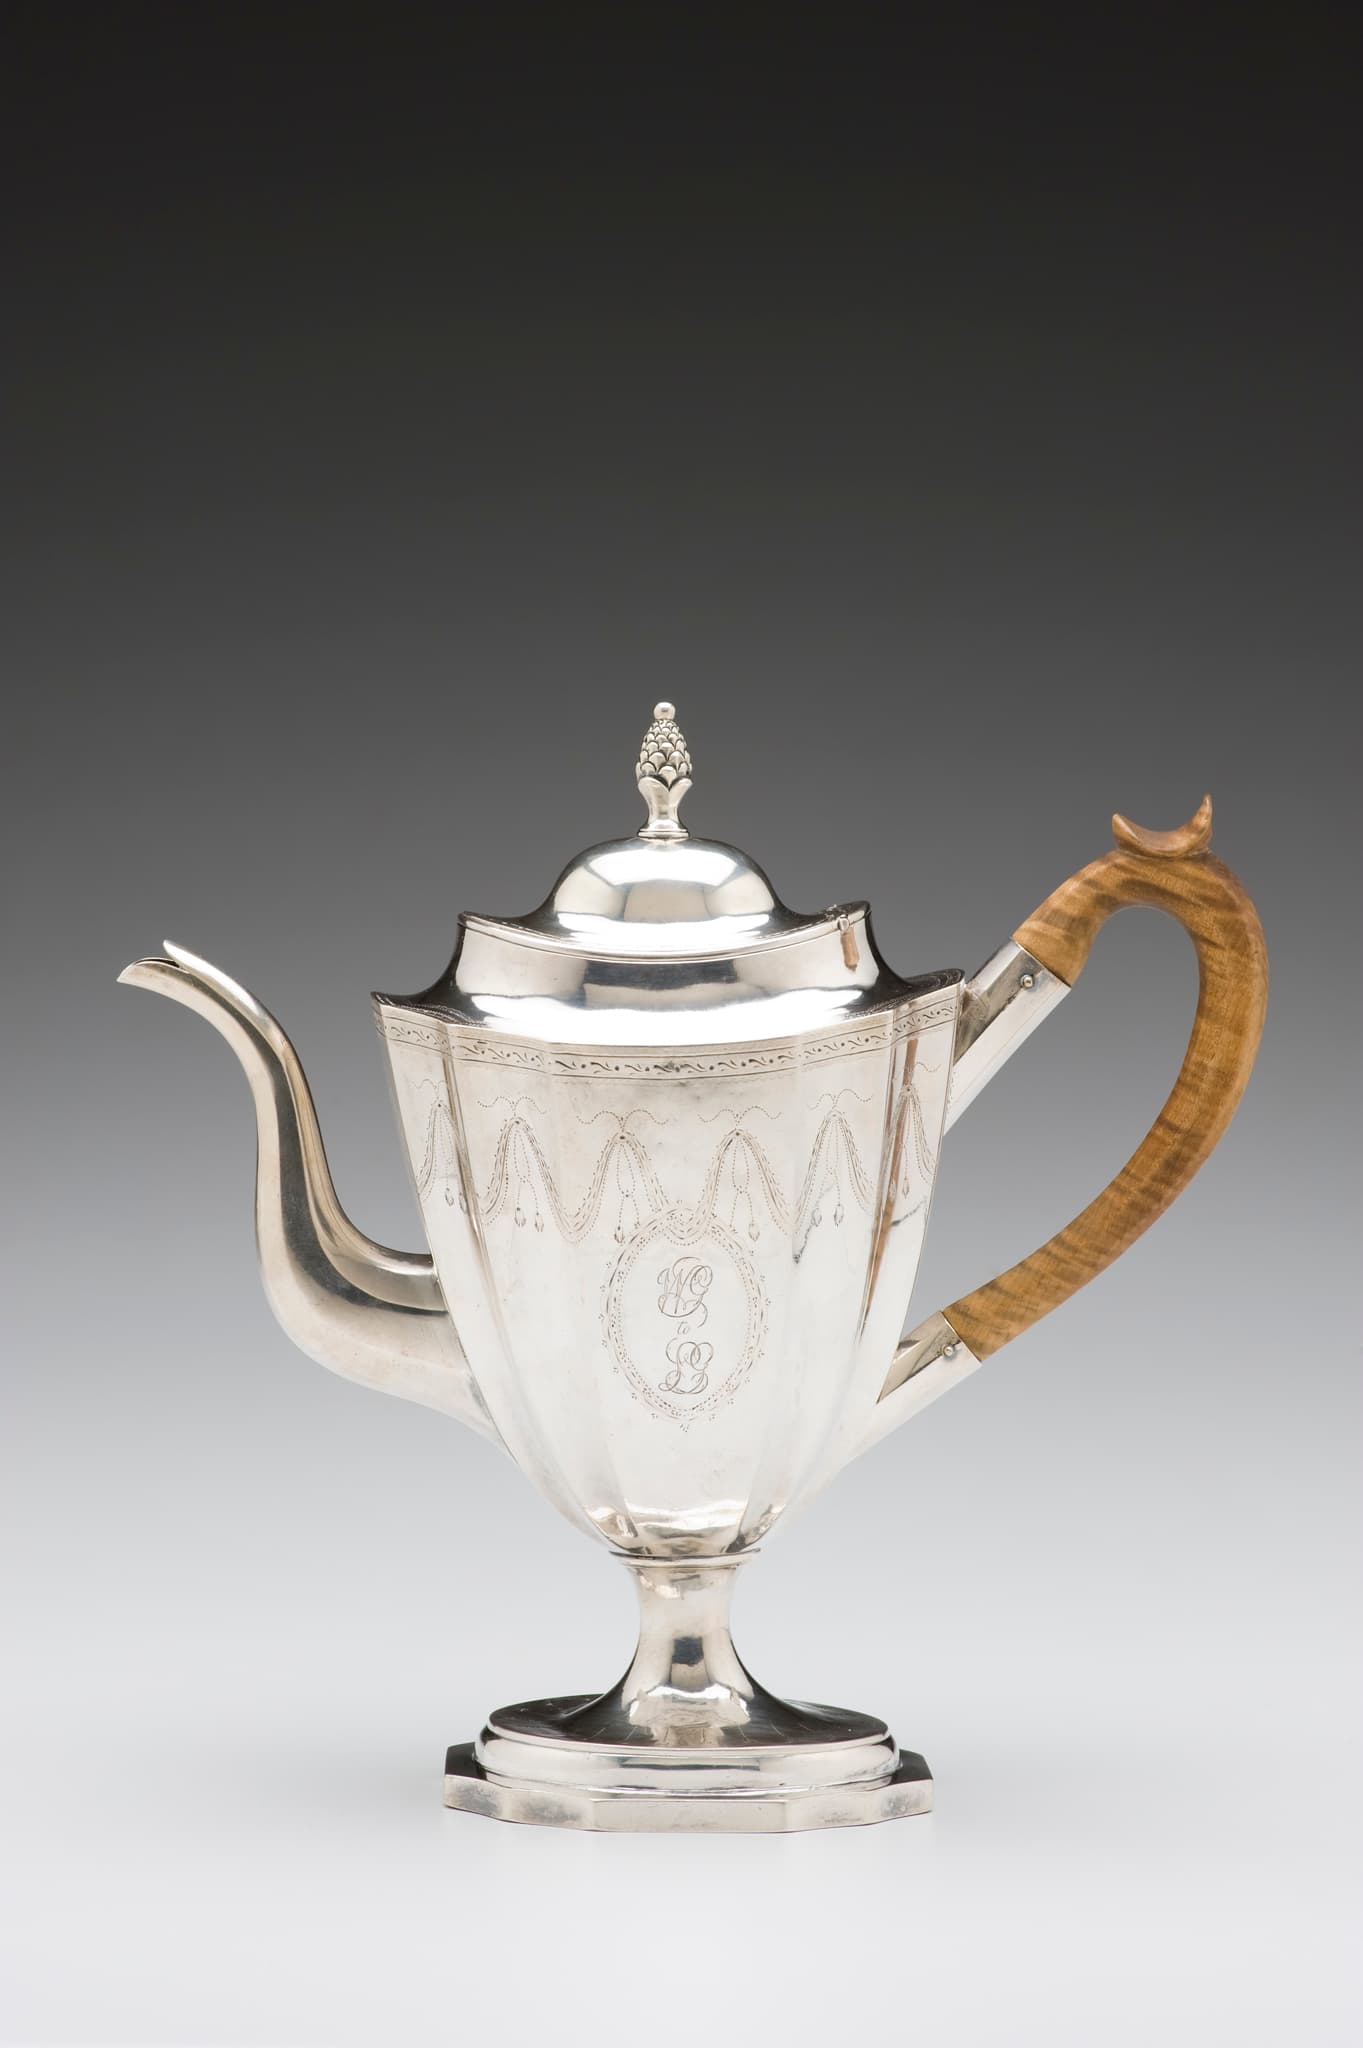 Paul Revere, William Goddard Teapot, Courtesy of the Kamm Teapot Collection, Craft in America